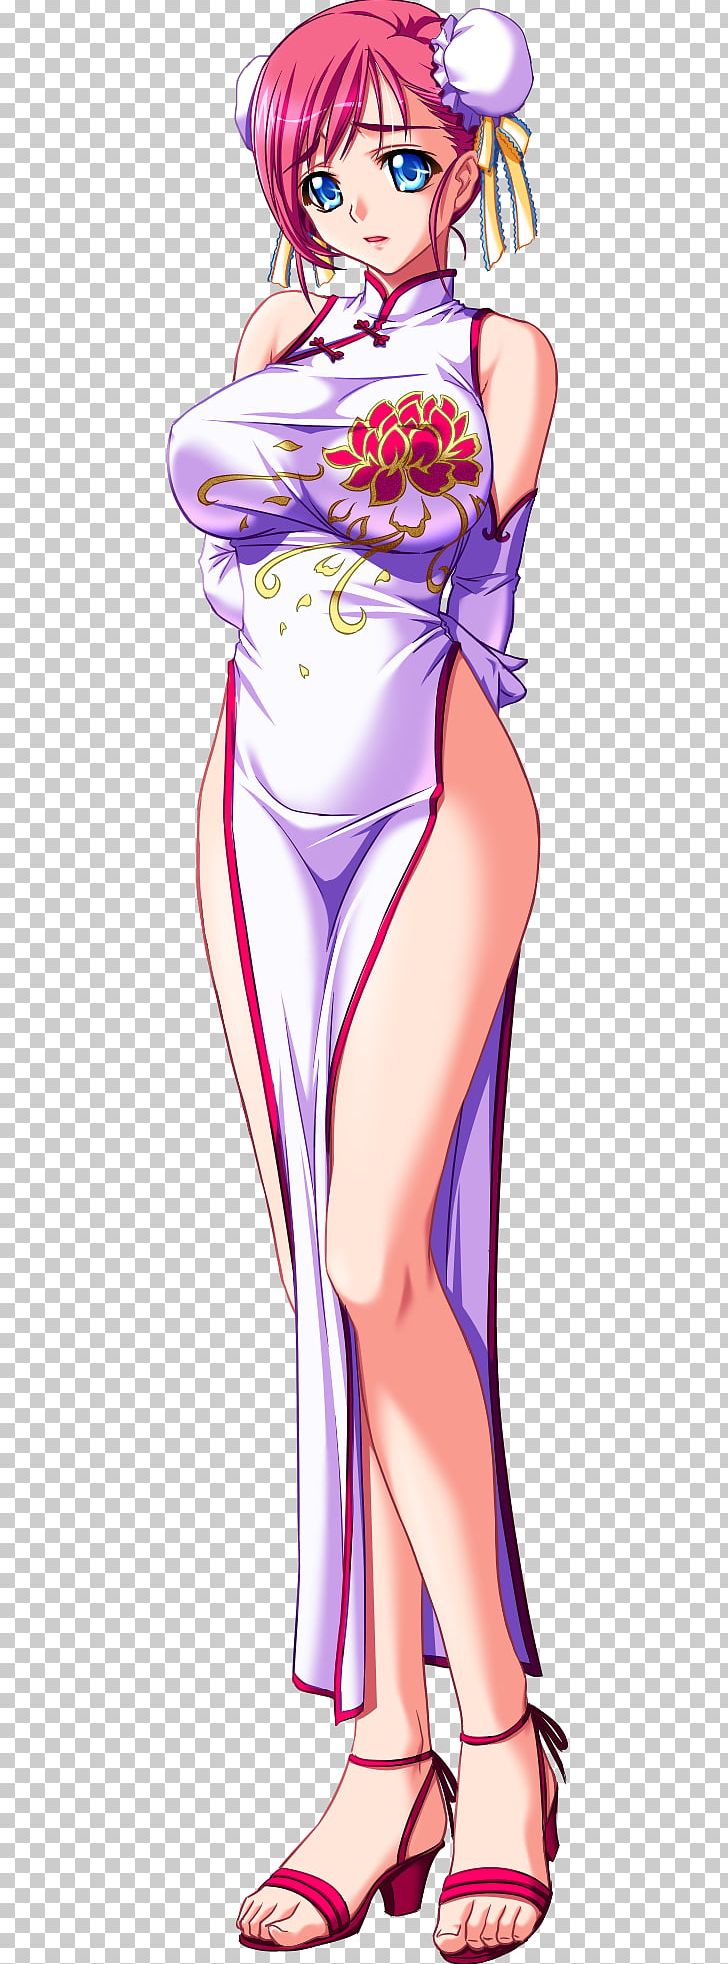 Thigh Arm Human Leg Muscle PNG, Clipart, Anime, Anime Ero, Anime Ero Pantsu, Anime Ero Pussy, Arm Free PNG Download